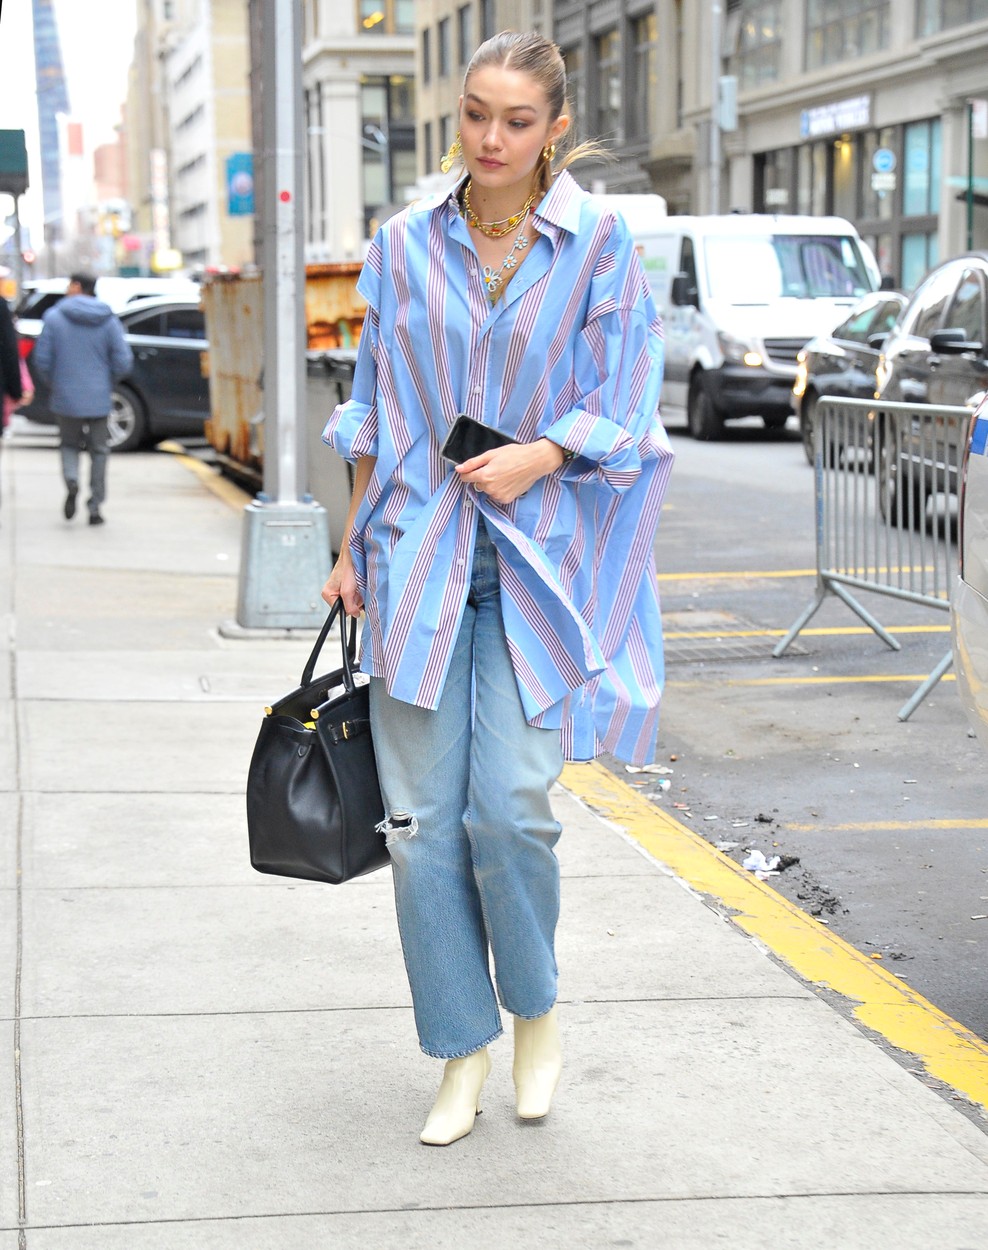 02/05/2020 EXCLUSIVE: Gigi Hadid is pictured stepping out in New York City. The 24 year old supermodel wore an oversized striped dress shirt, light blue jeans, and white heels., Image: 496629905, License: Rights-managed, Restrictions: Exclusive NO usage without agreed price and terms. Please contact sales@theimagedirect.com, Model Release: no, Credit line: TheImageDirect.com / The Image Direct / Profimedia